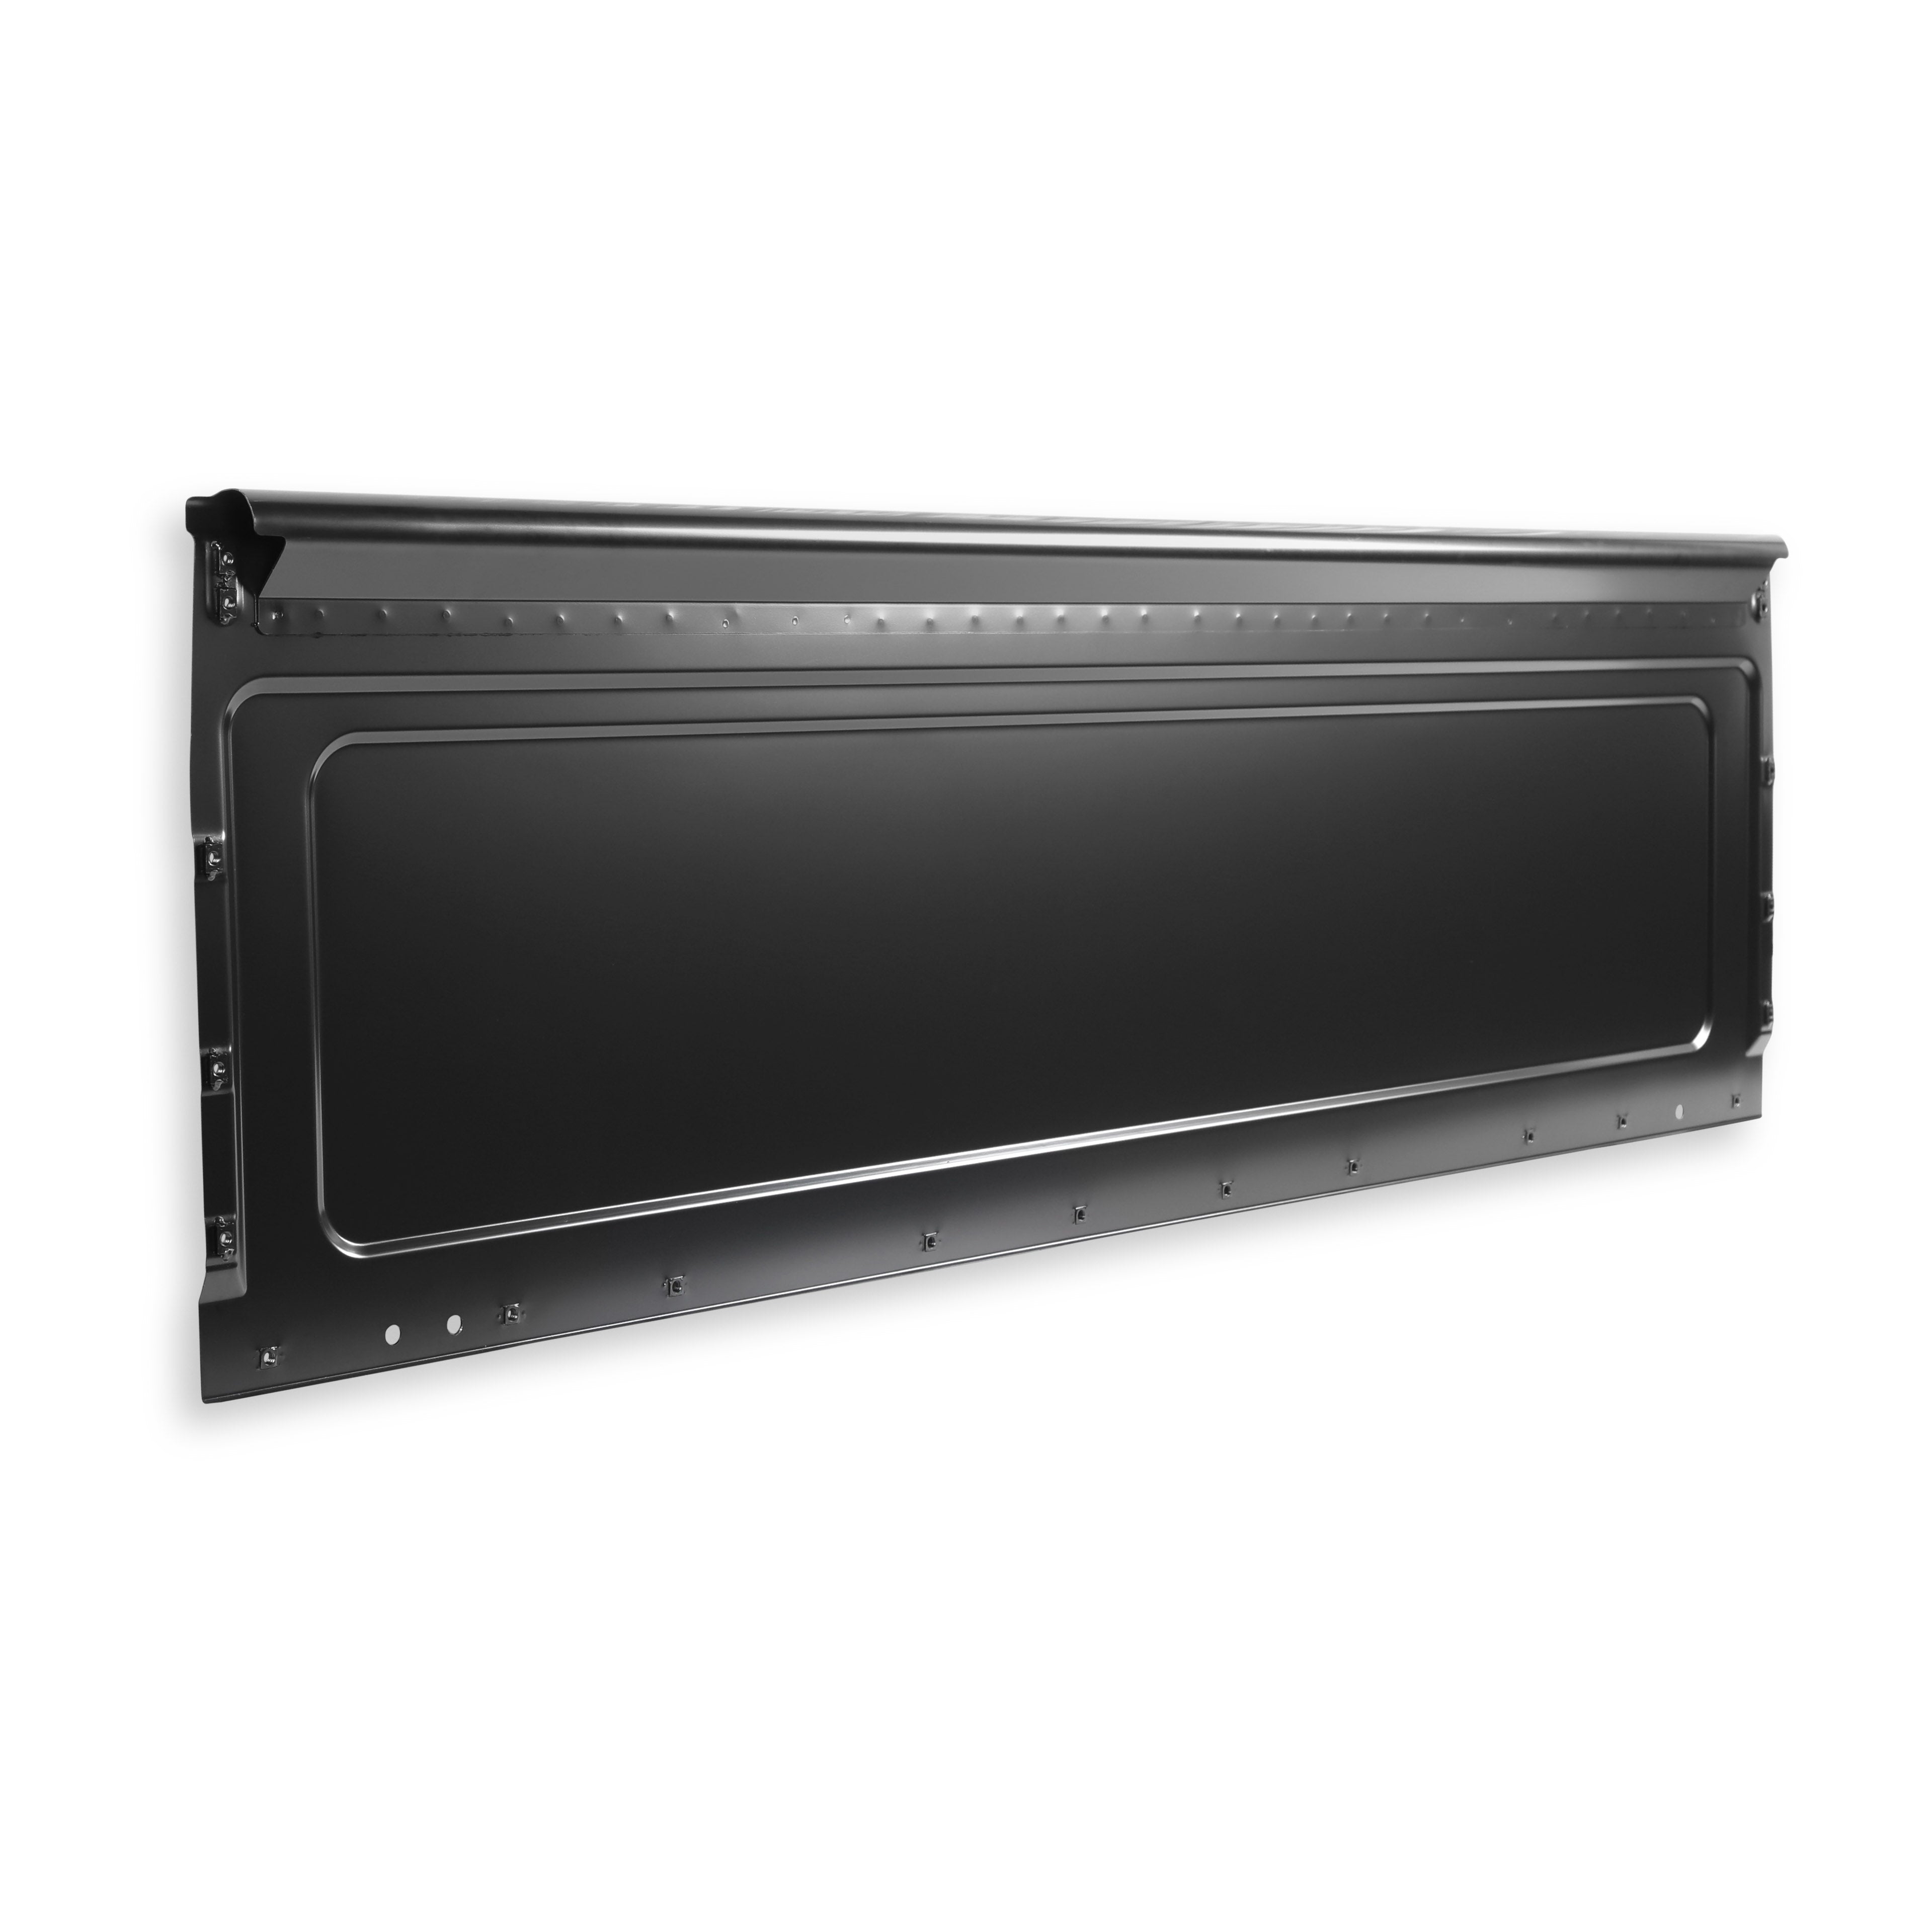 BROTHERS C/K Front Bed Panel pn 04-484